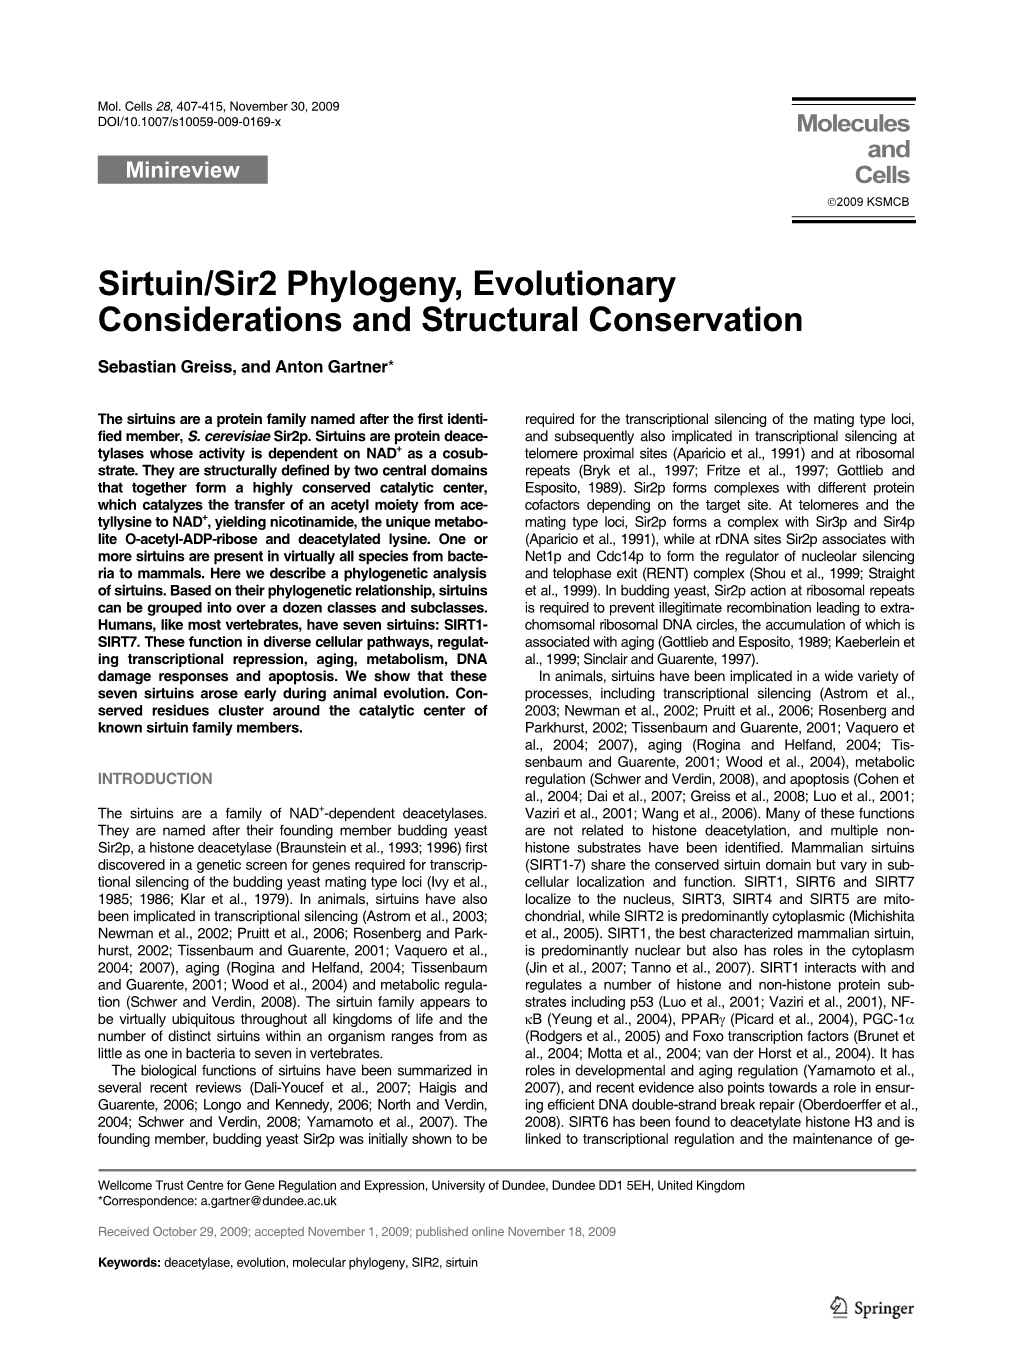 Sirtuin/Sir2 Phylogeny, Evolutionary Considerations and Structural Conservation